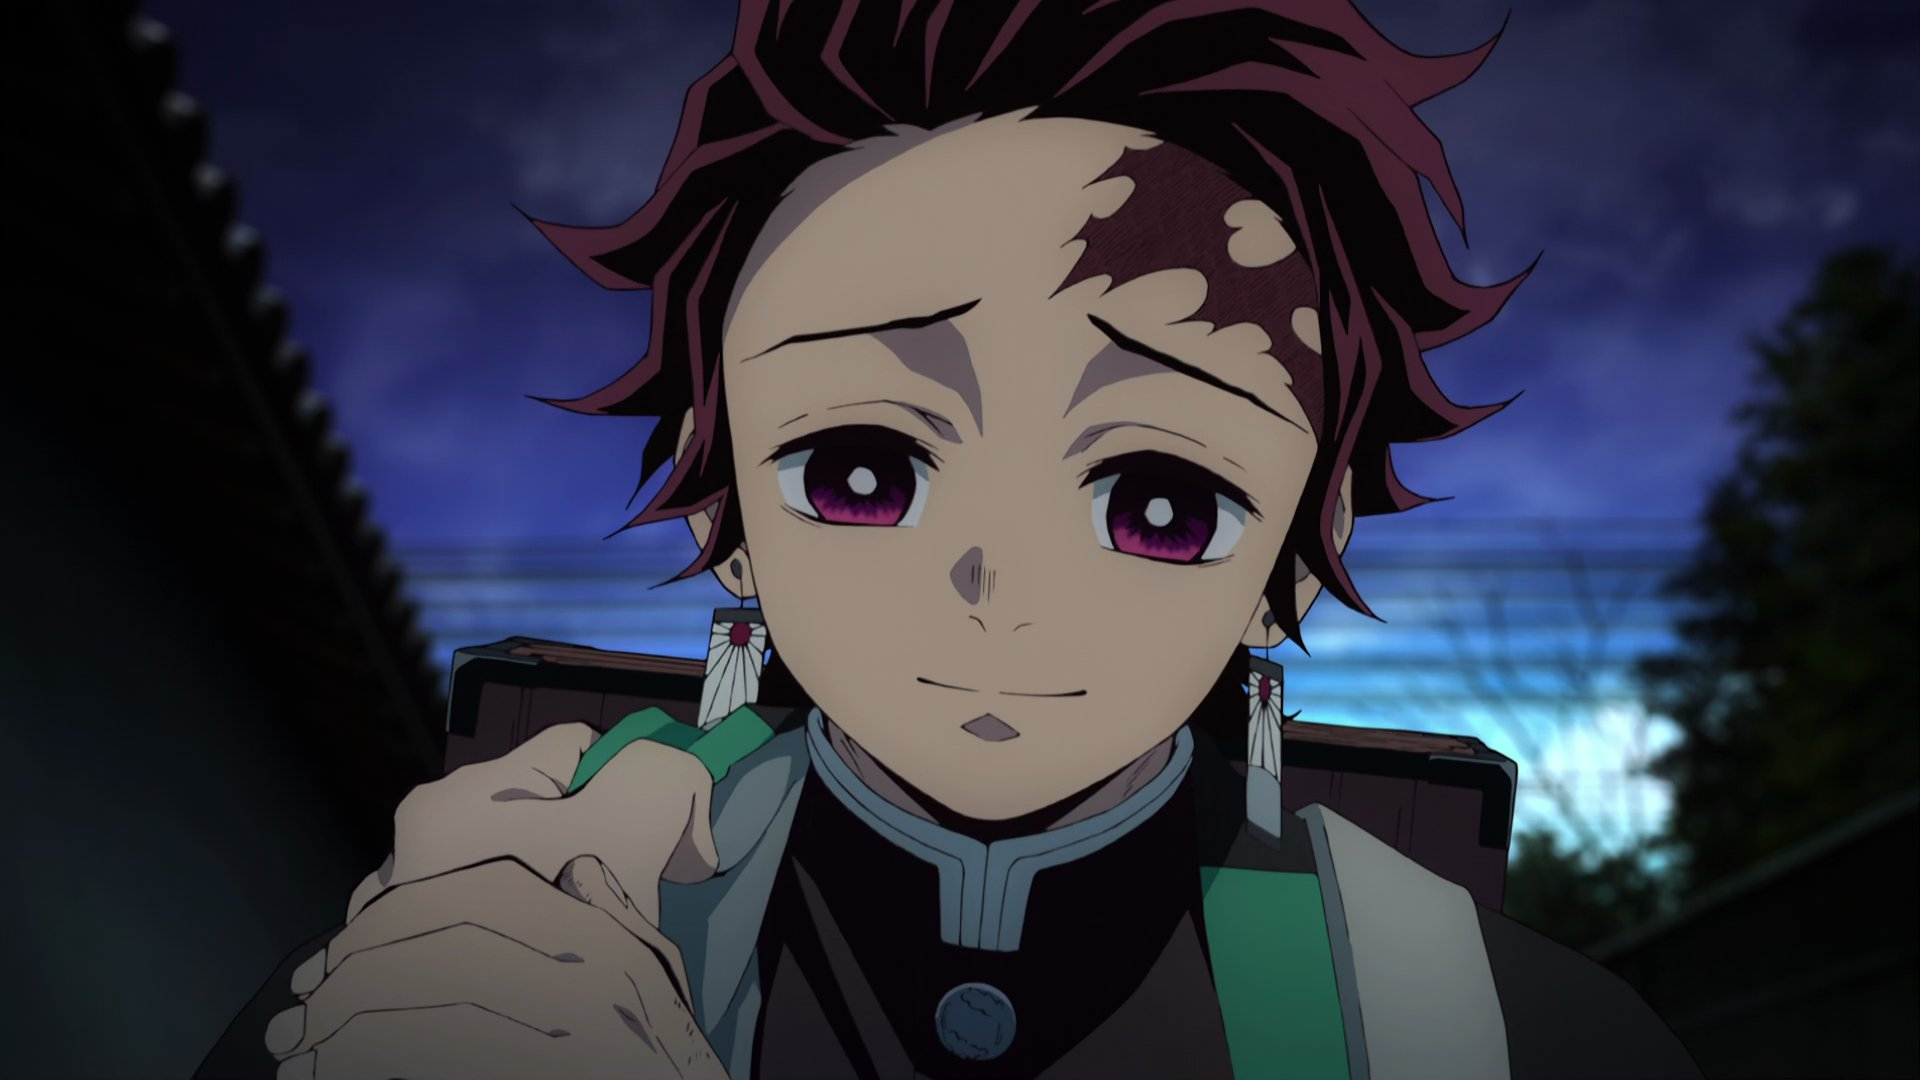 Demon Slayer Season 3 Episode 7: Genya's perilous fight and Tanjiro's  mission against fifth demon